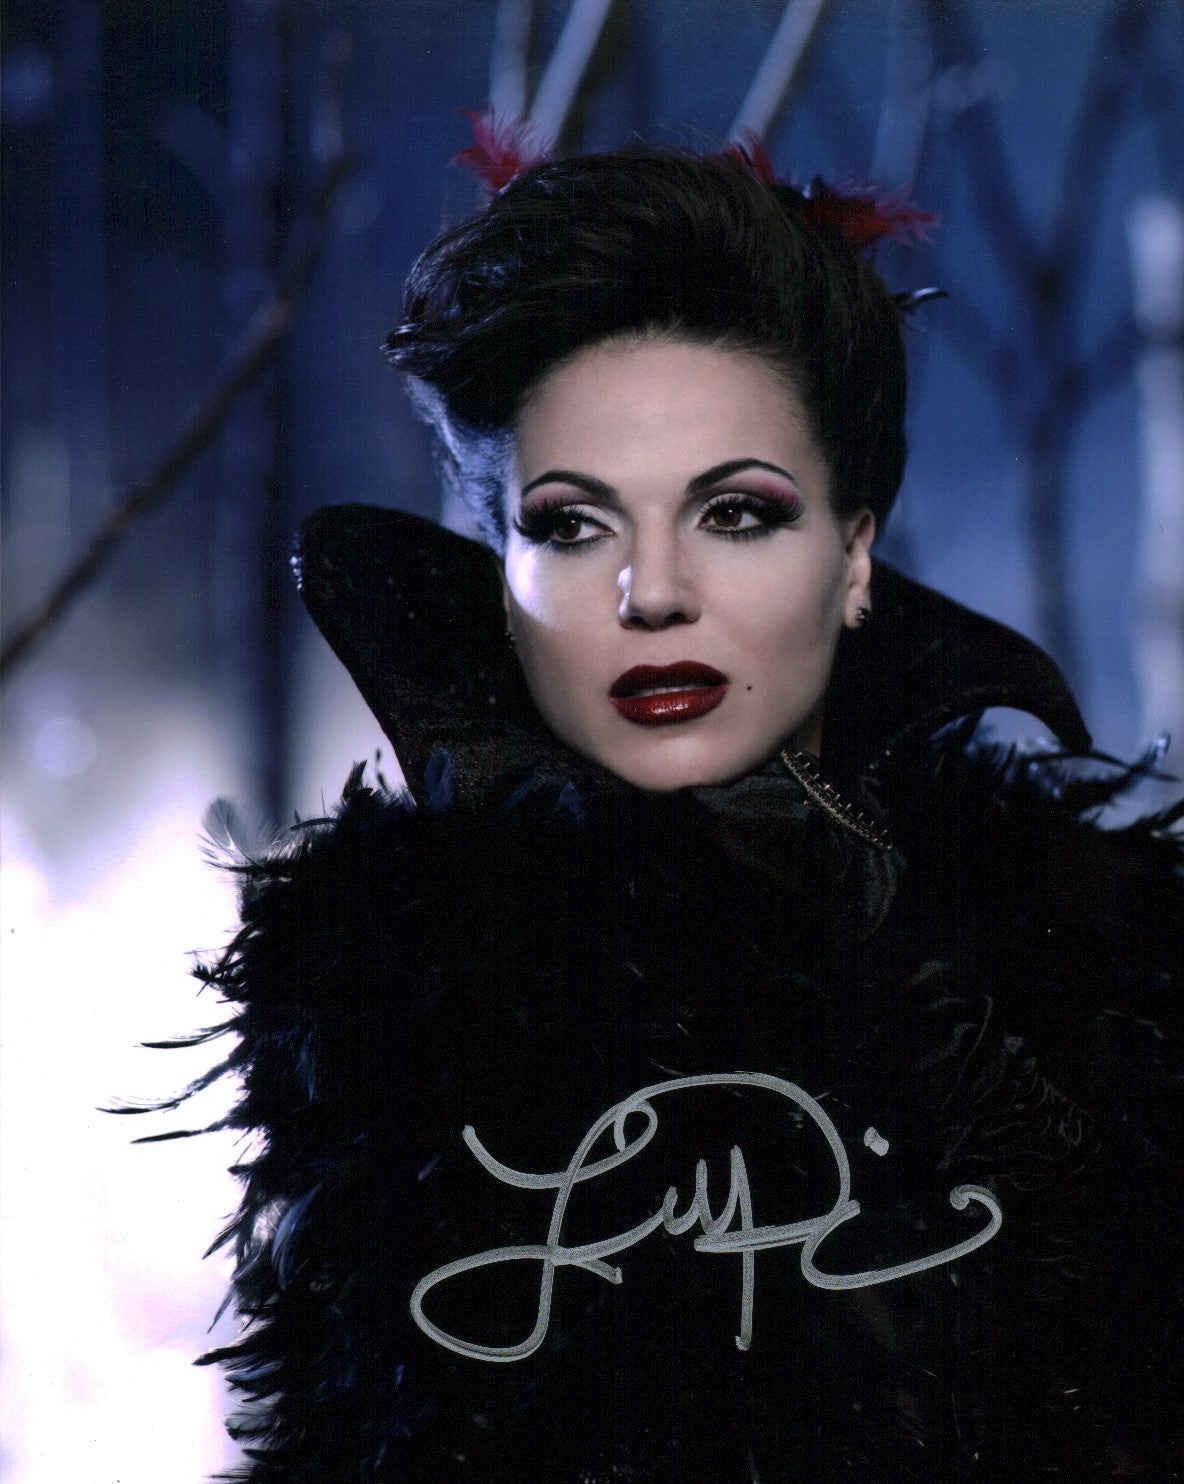 Lana Parrilla Once Upon A Time OUAT 8x10 Photo Signed Autograph JSA Certified COA GalaxyCon